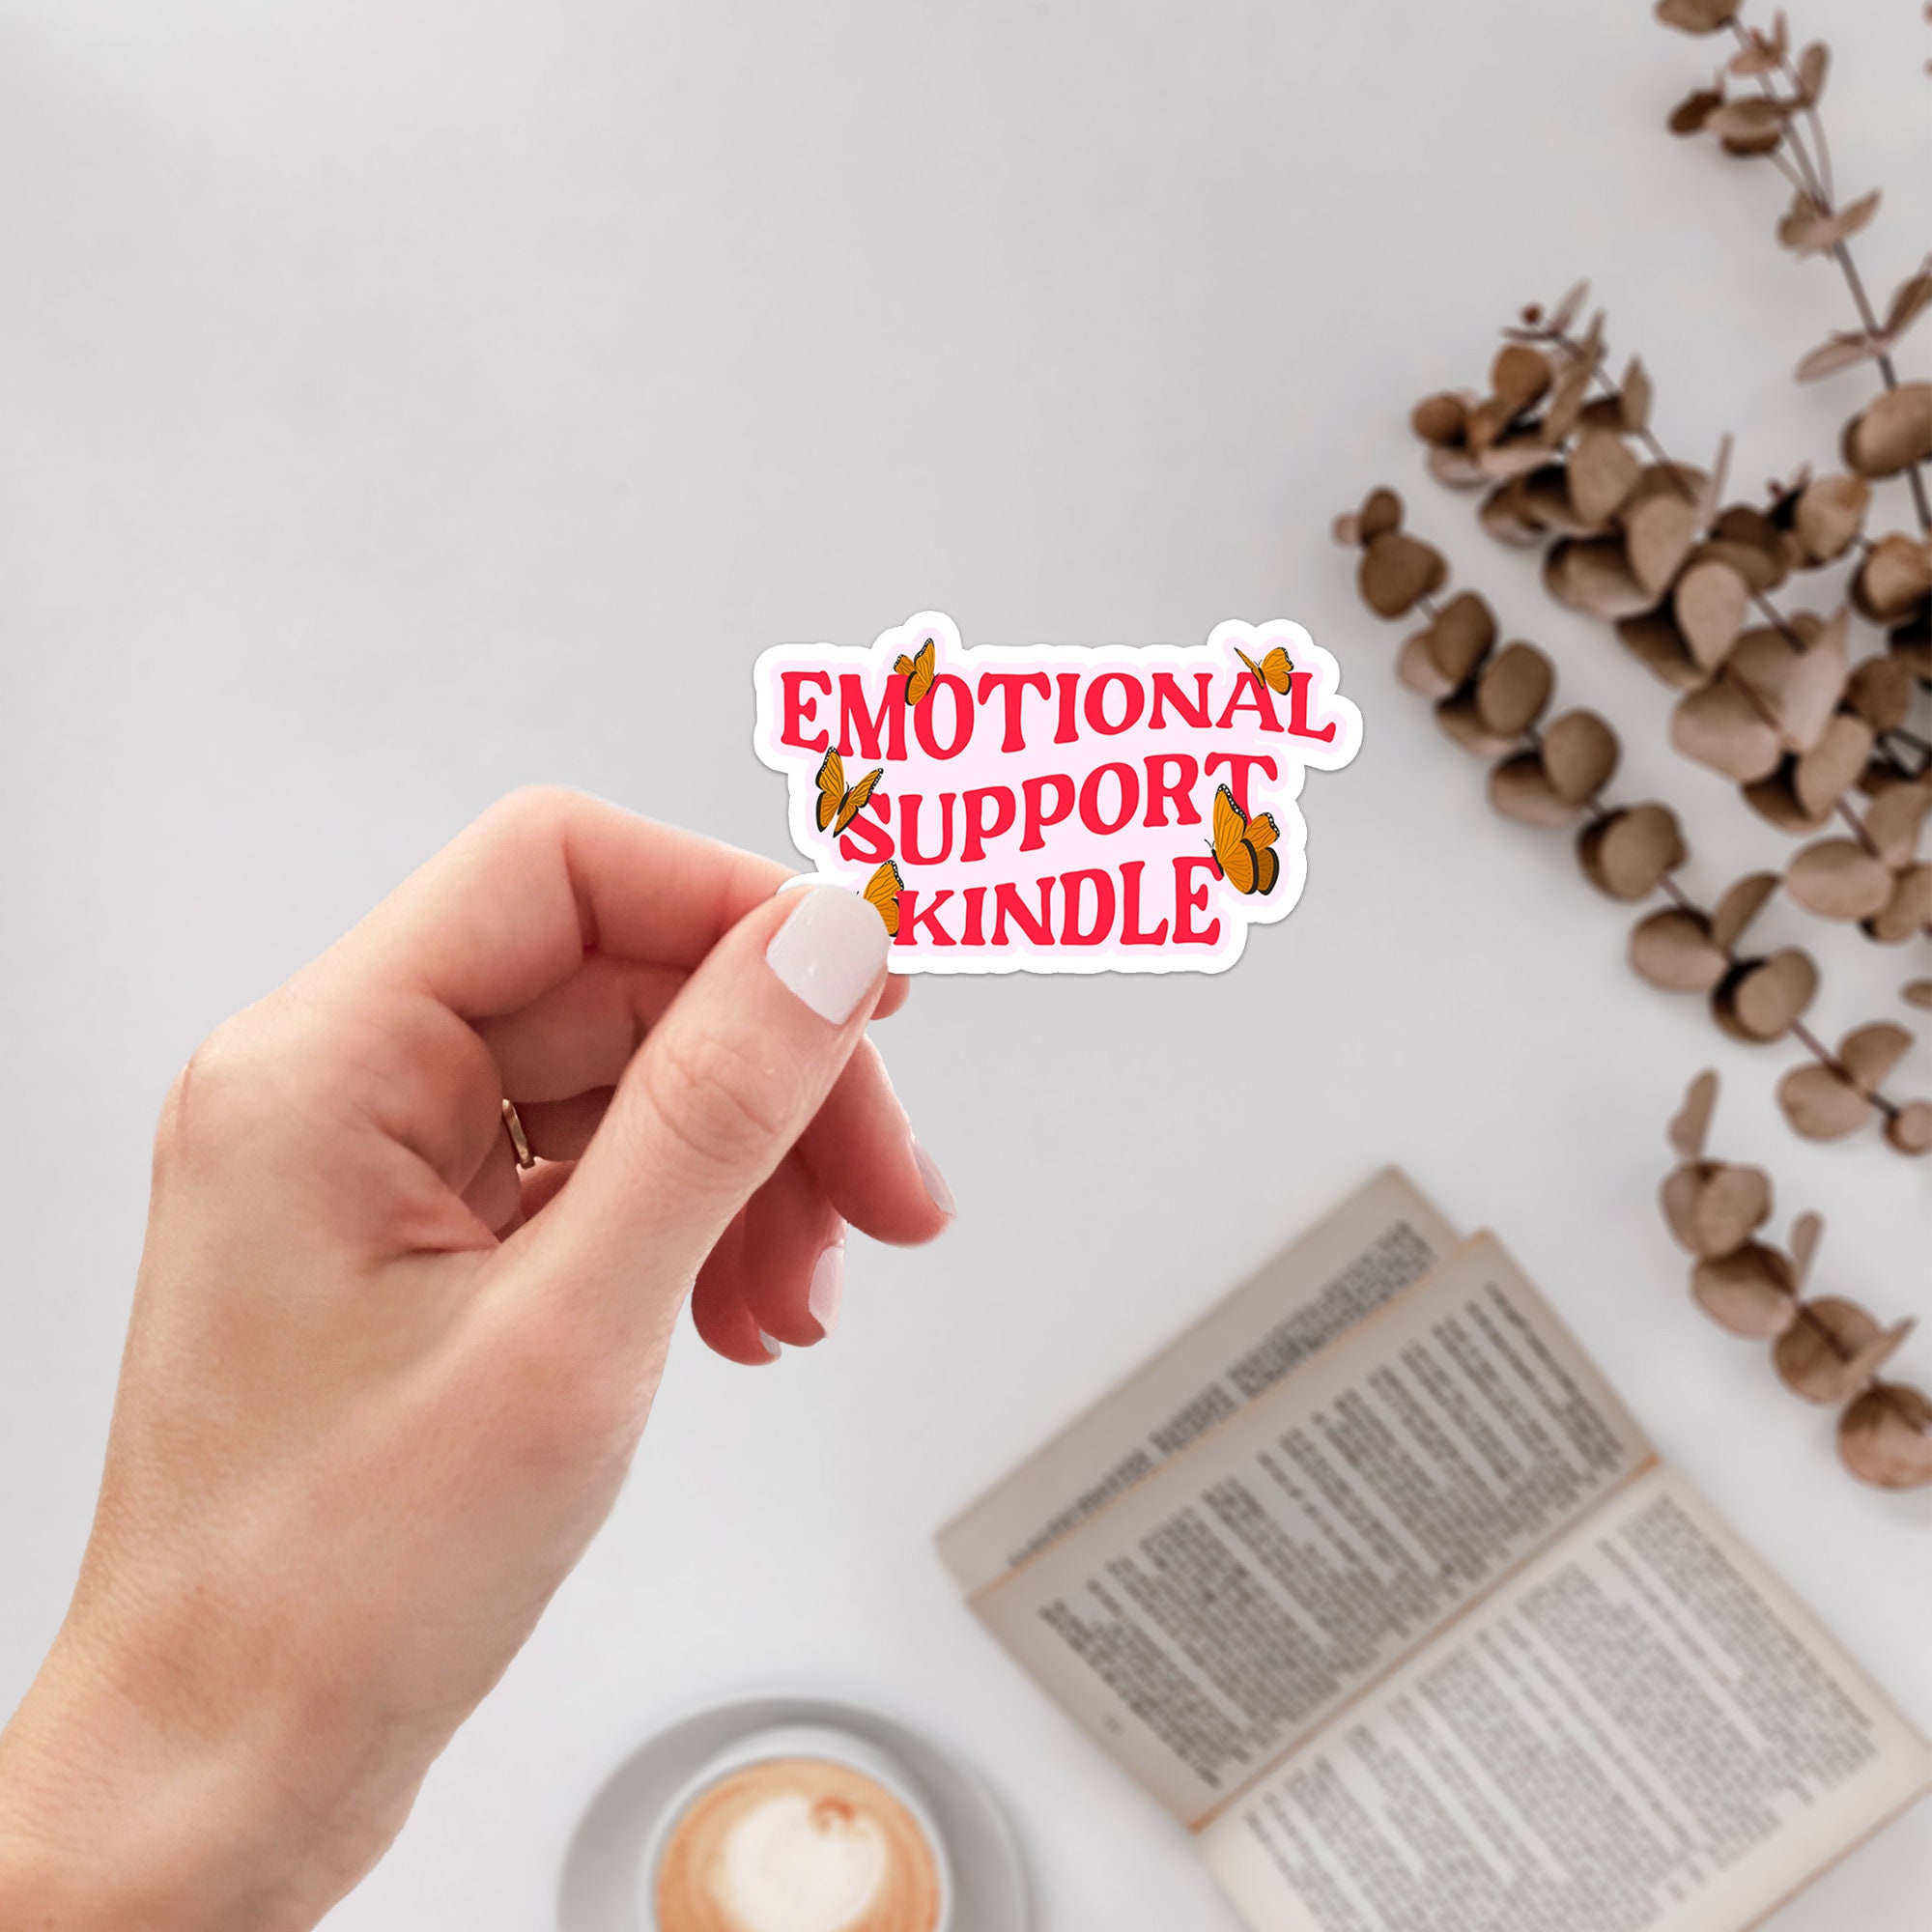 Emotional support kindle sticker – Romantasy Designs